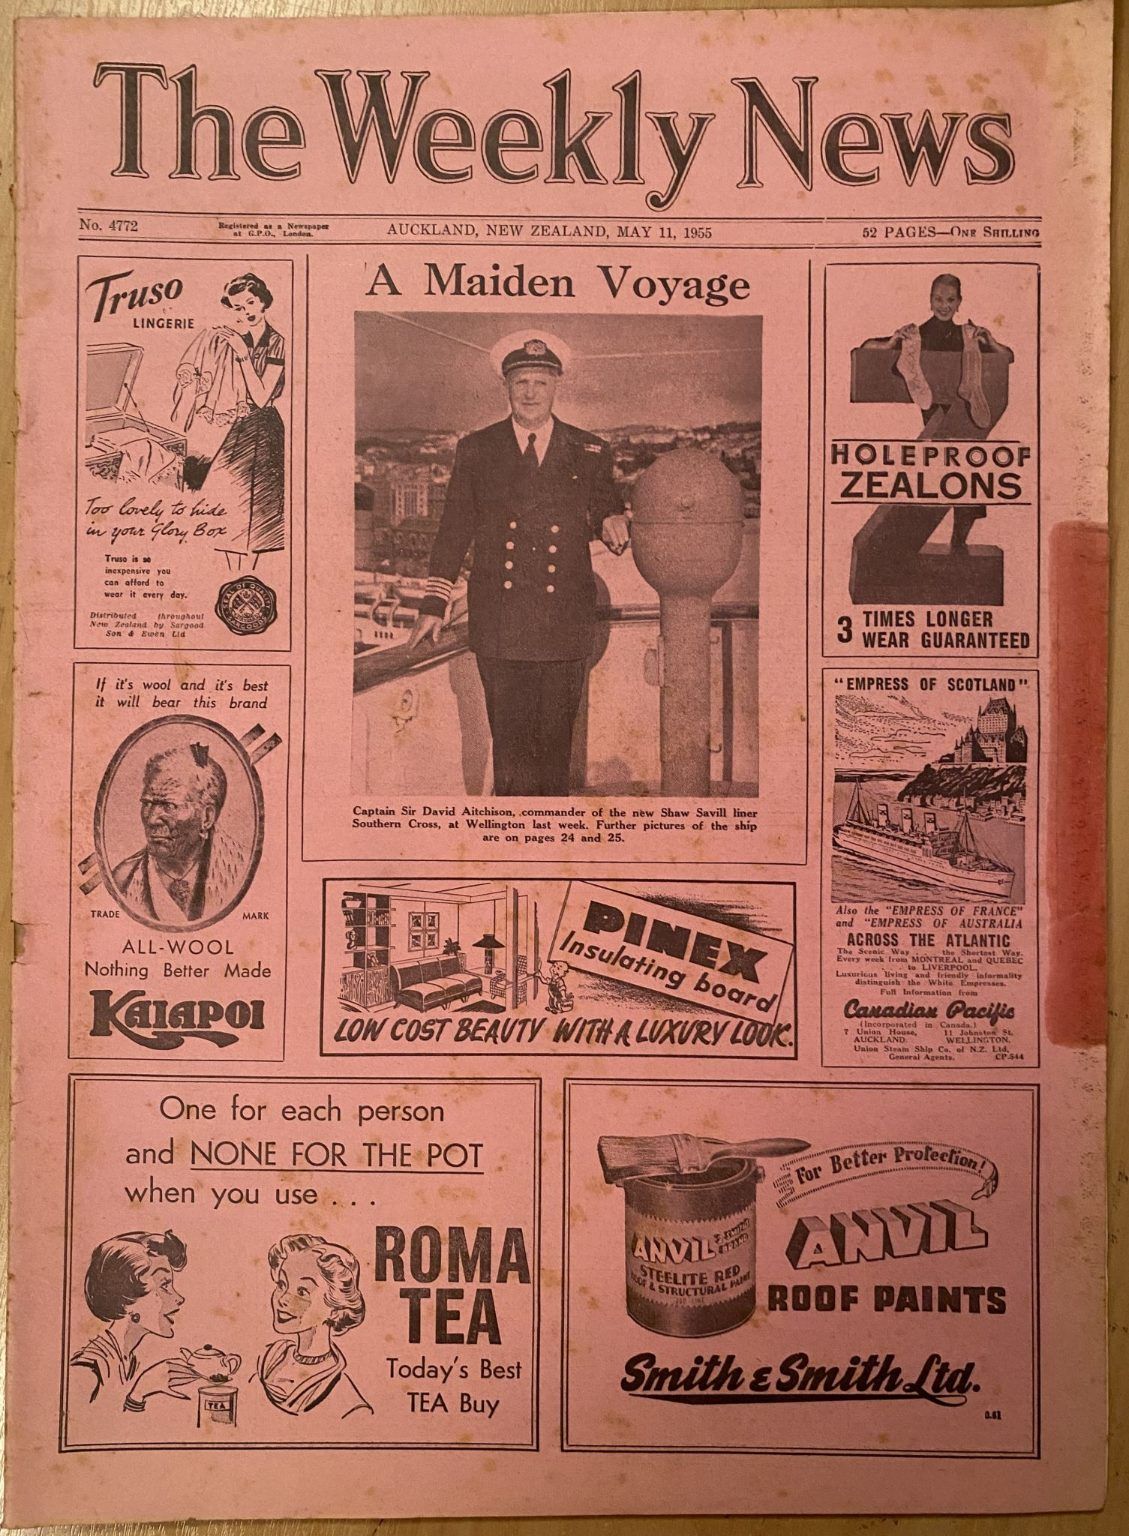 OLD NEWSPAPER: The Weekly News - No. 4772, 11 May 1955